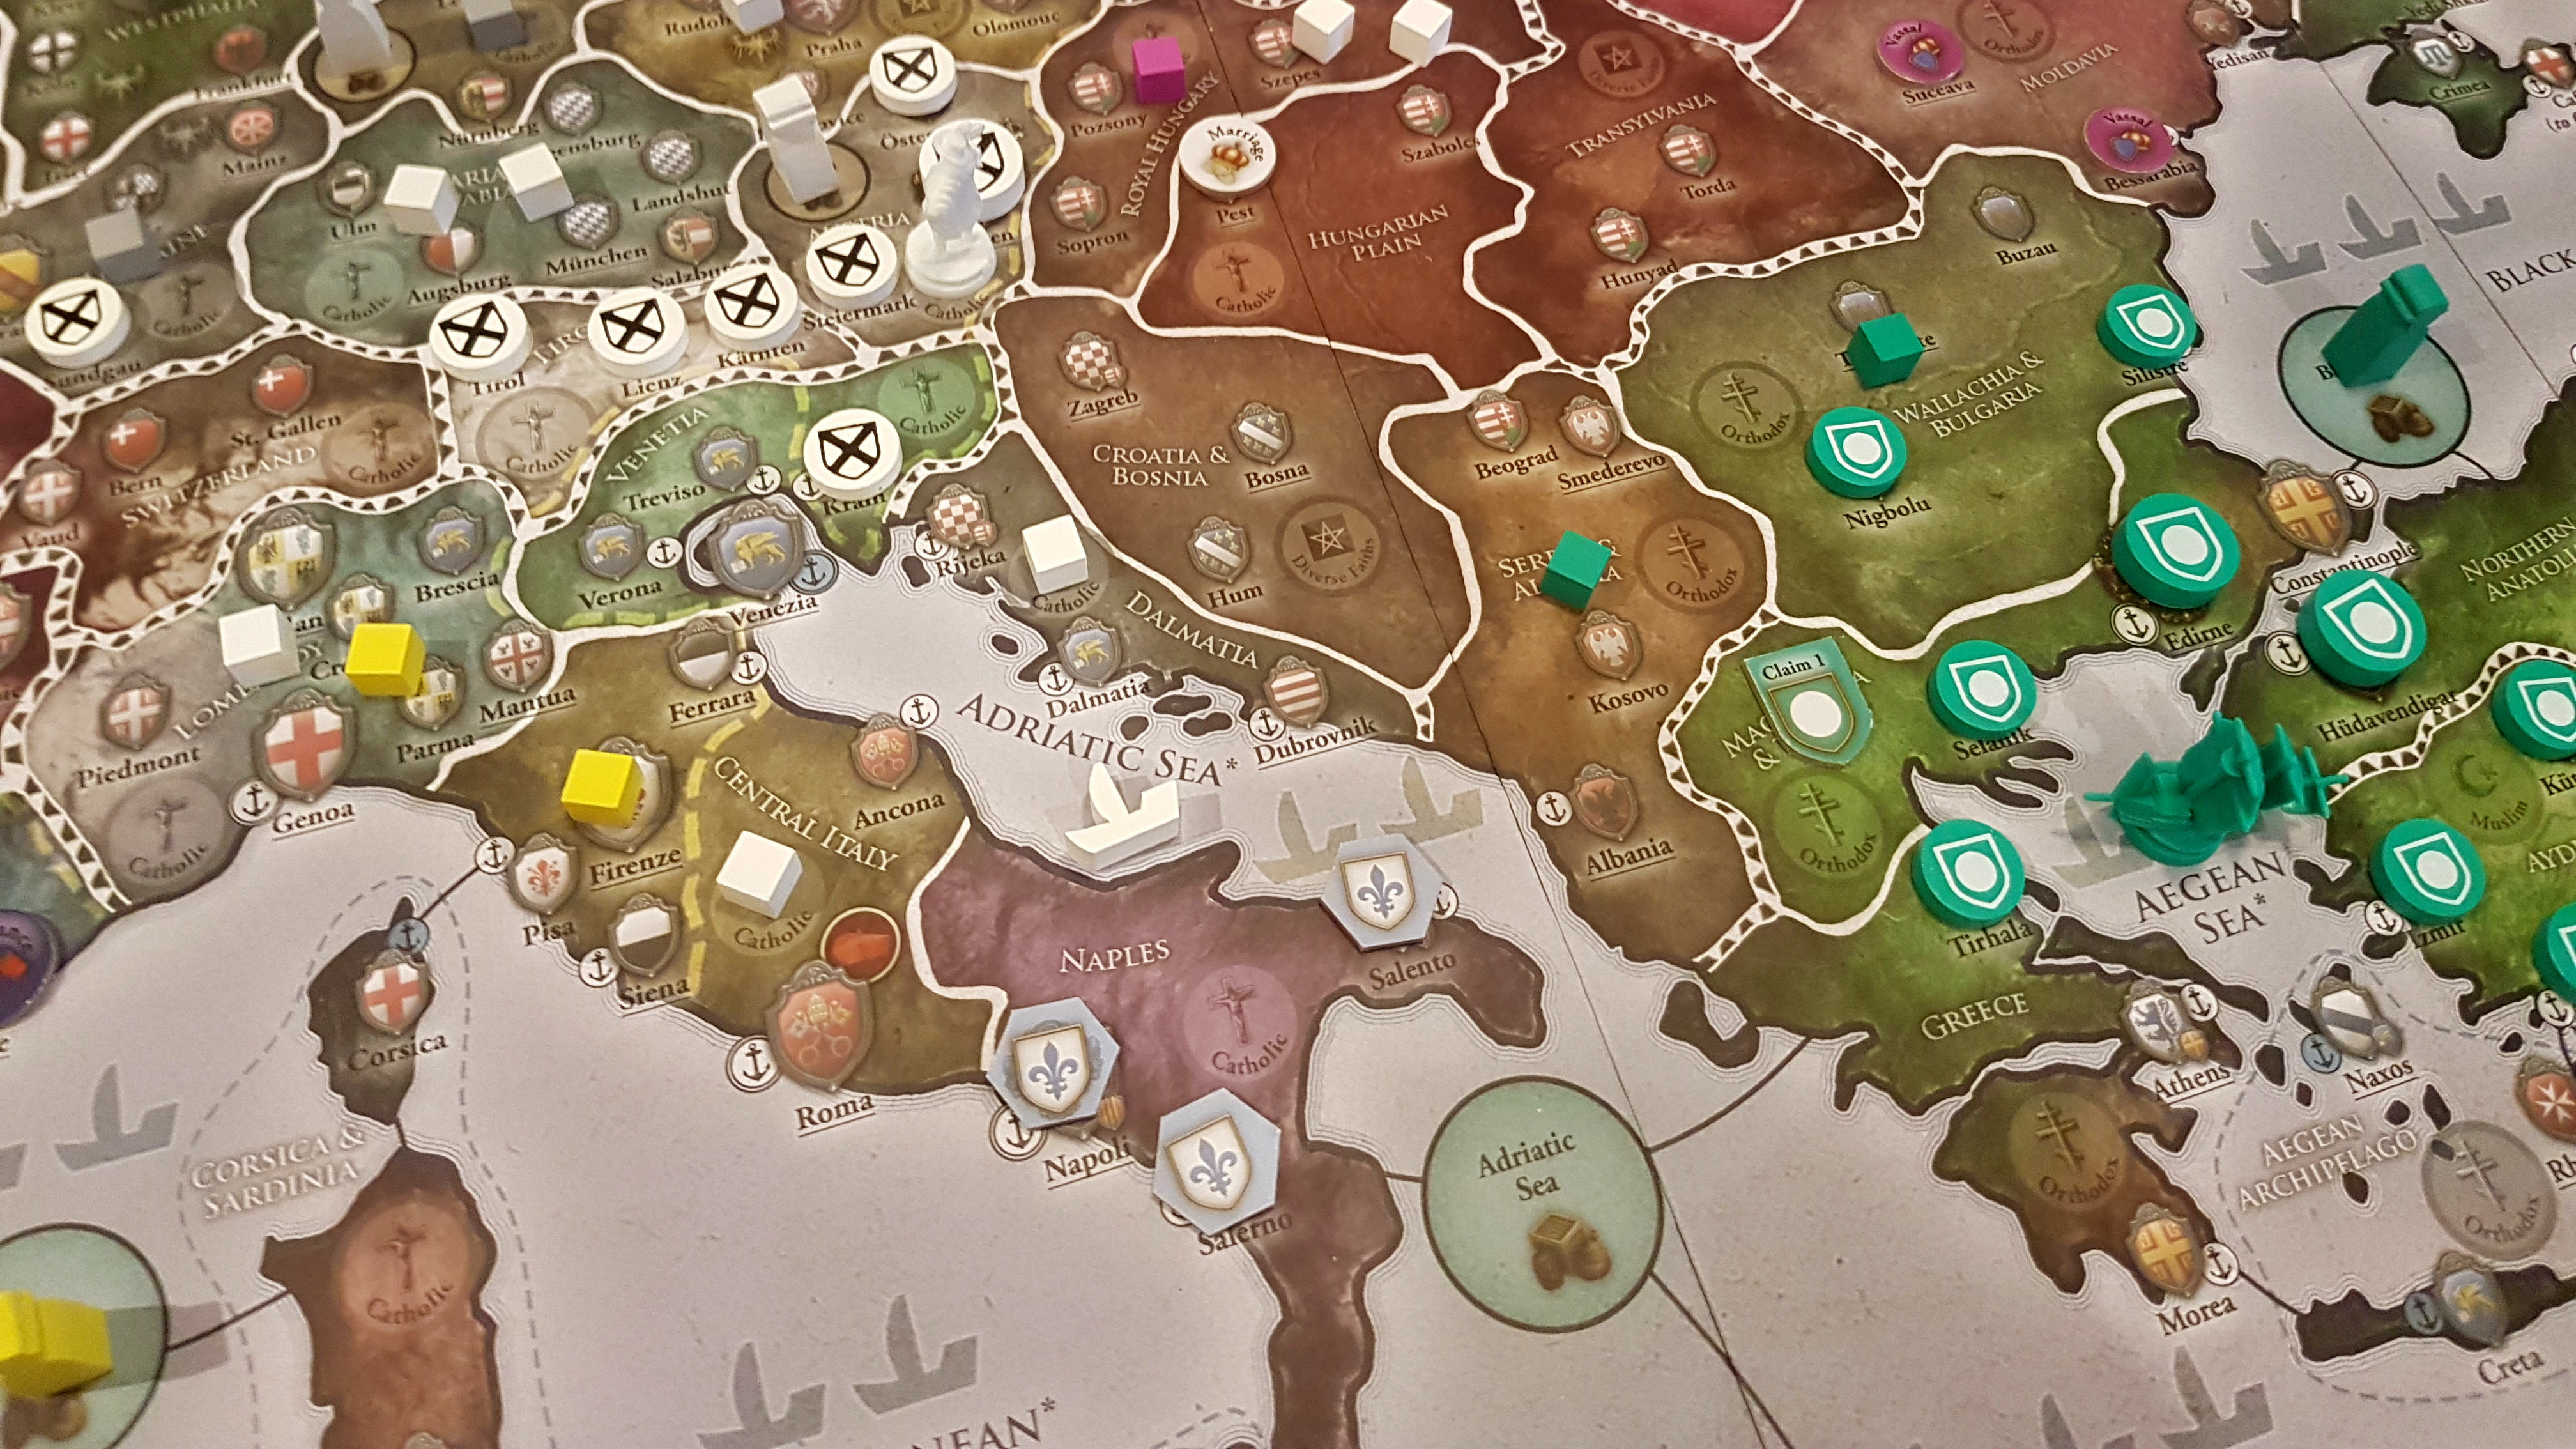 The Europa Universalis board game will hit stores next summer Wargamer